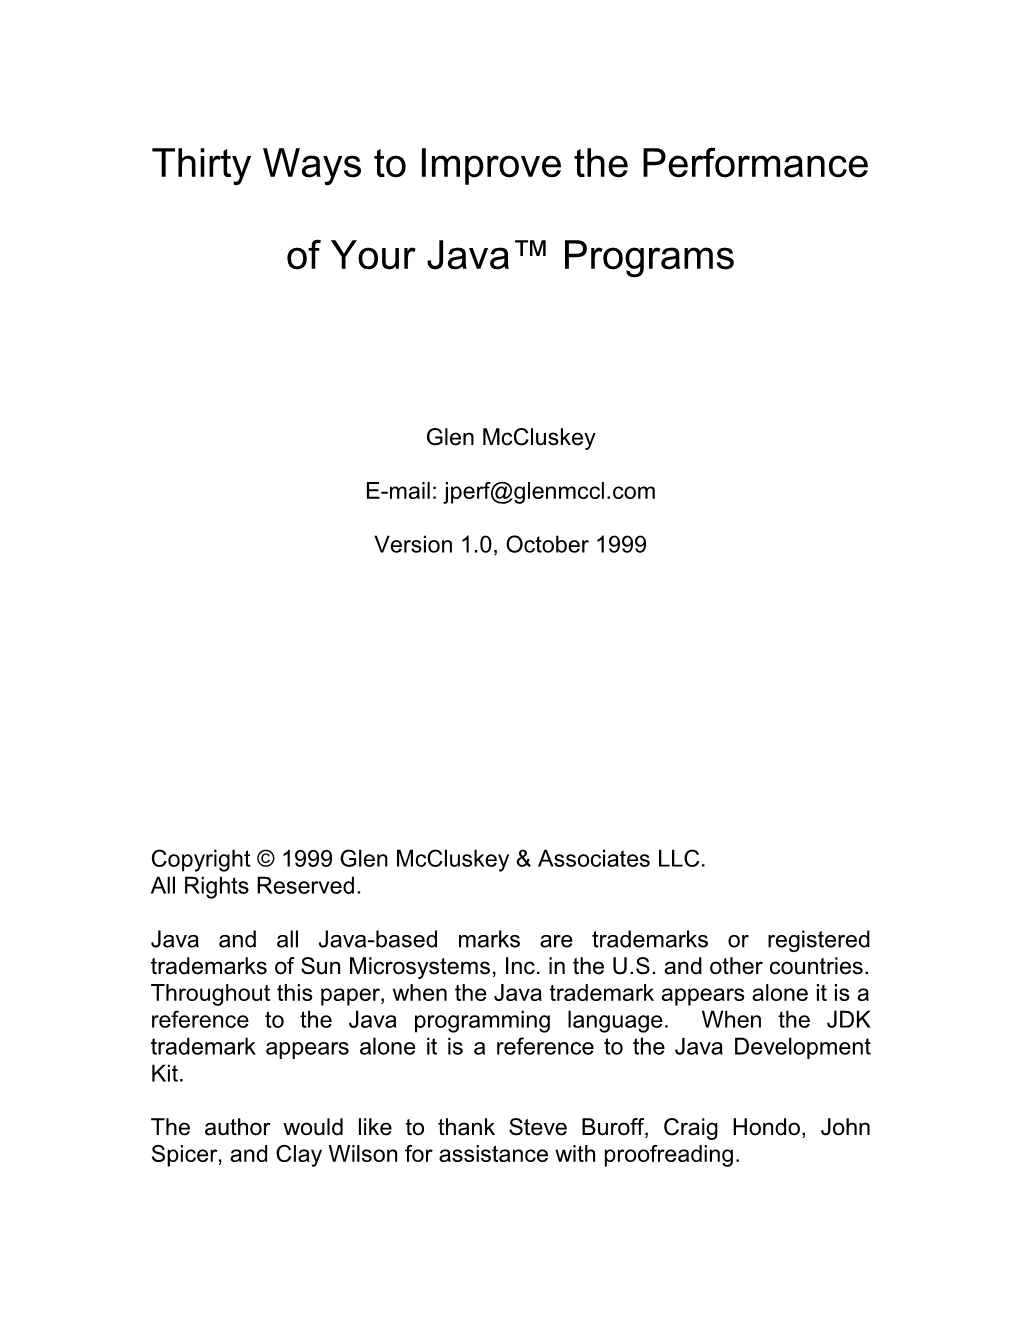 Thirty Ways to Improve the Performance of Your Java™ Programs